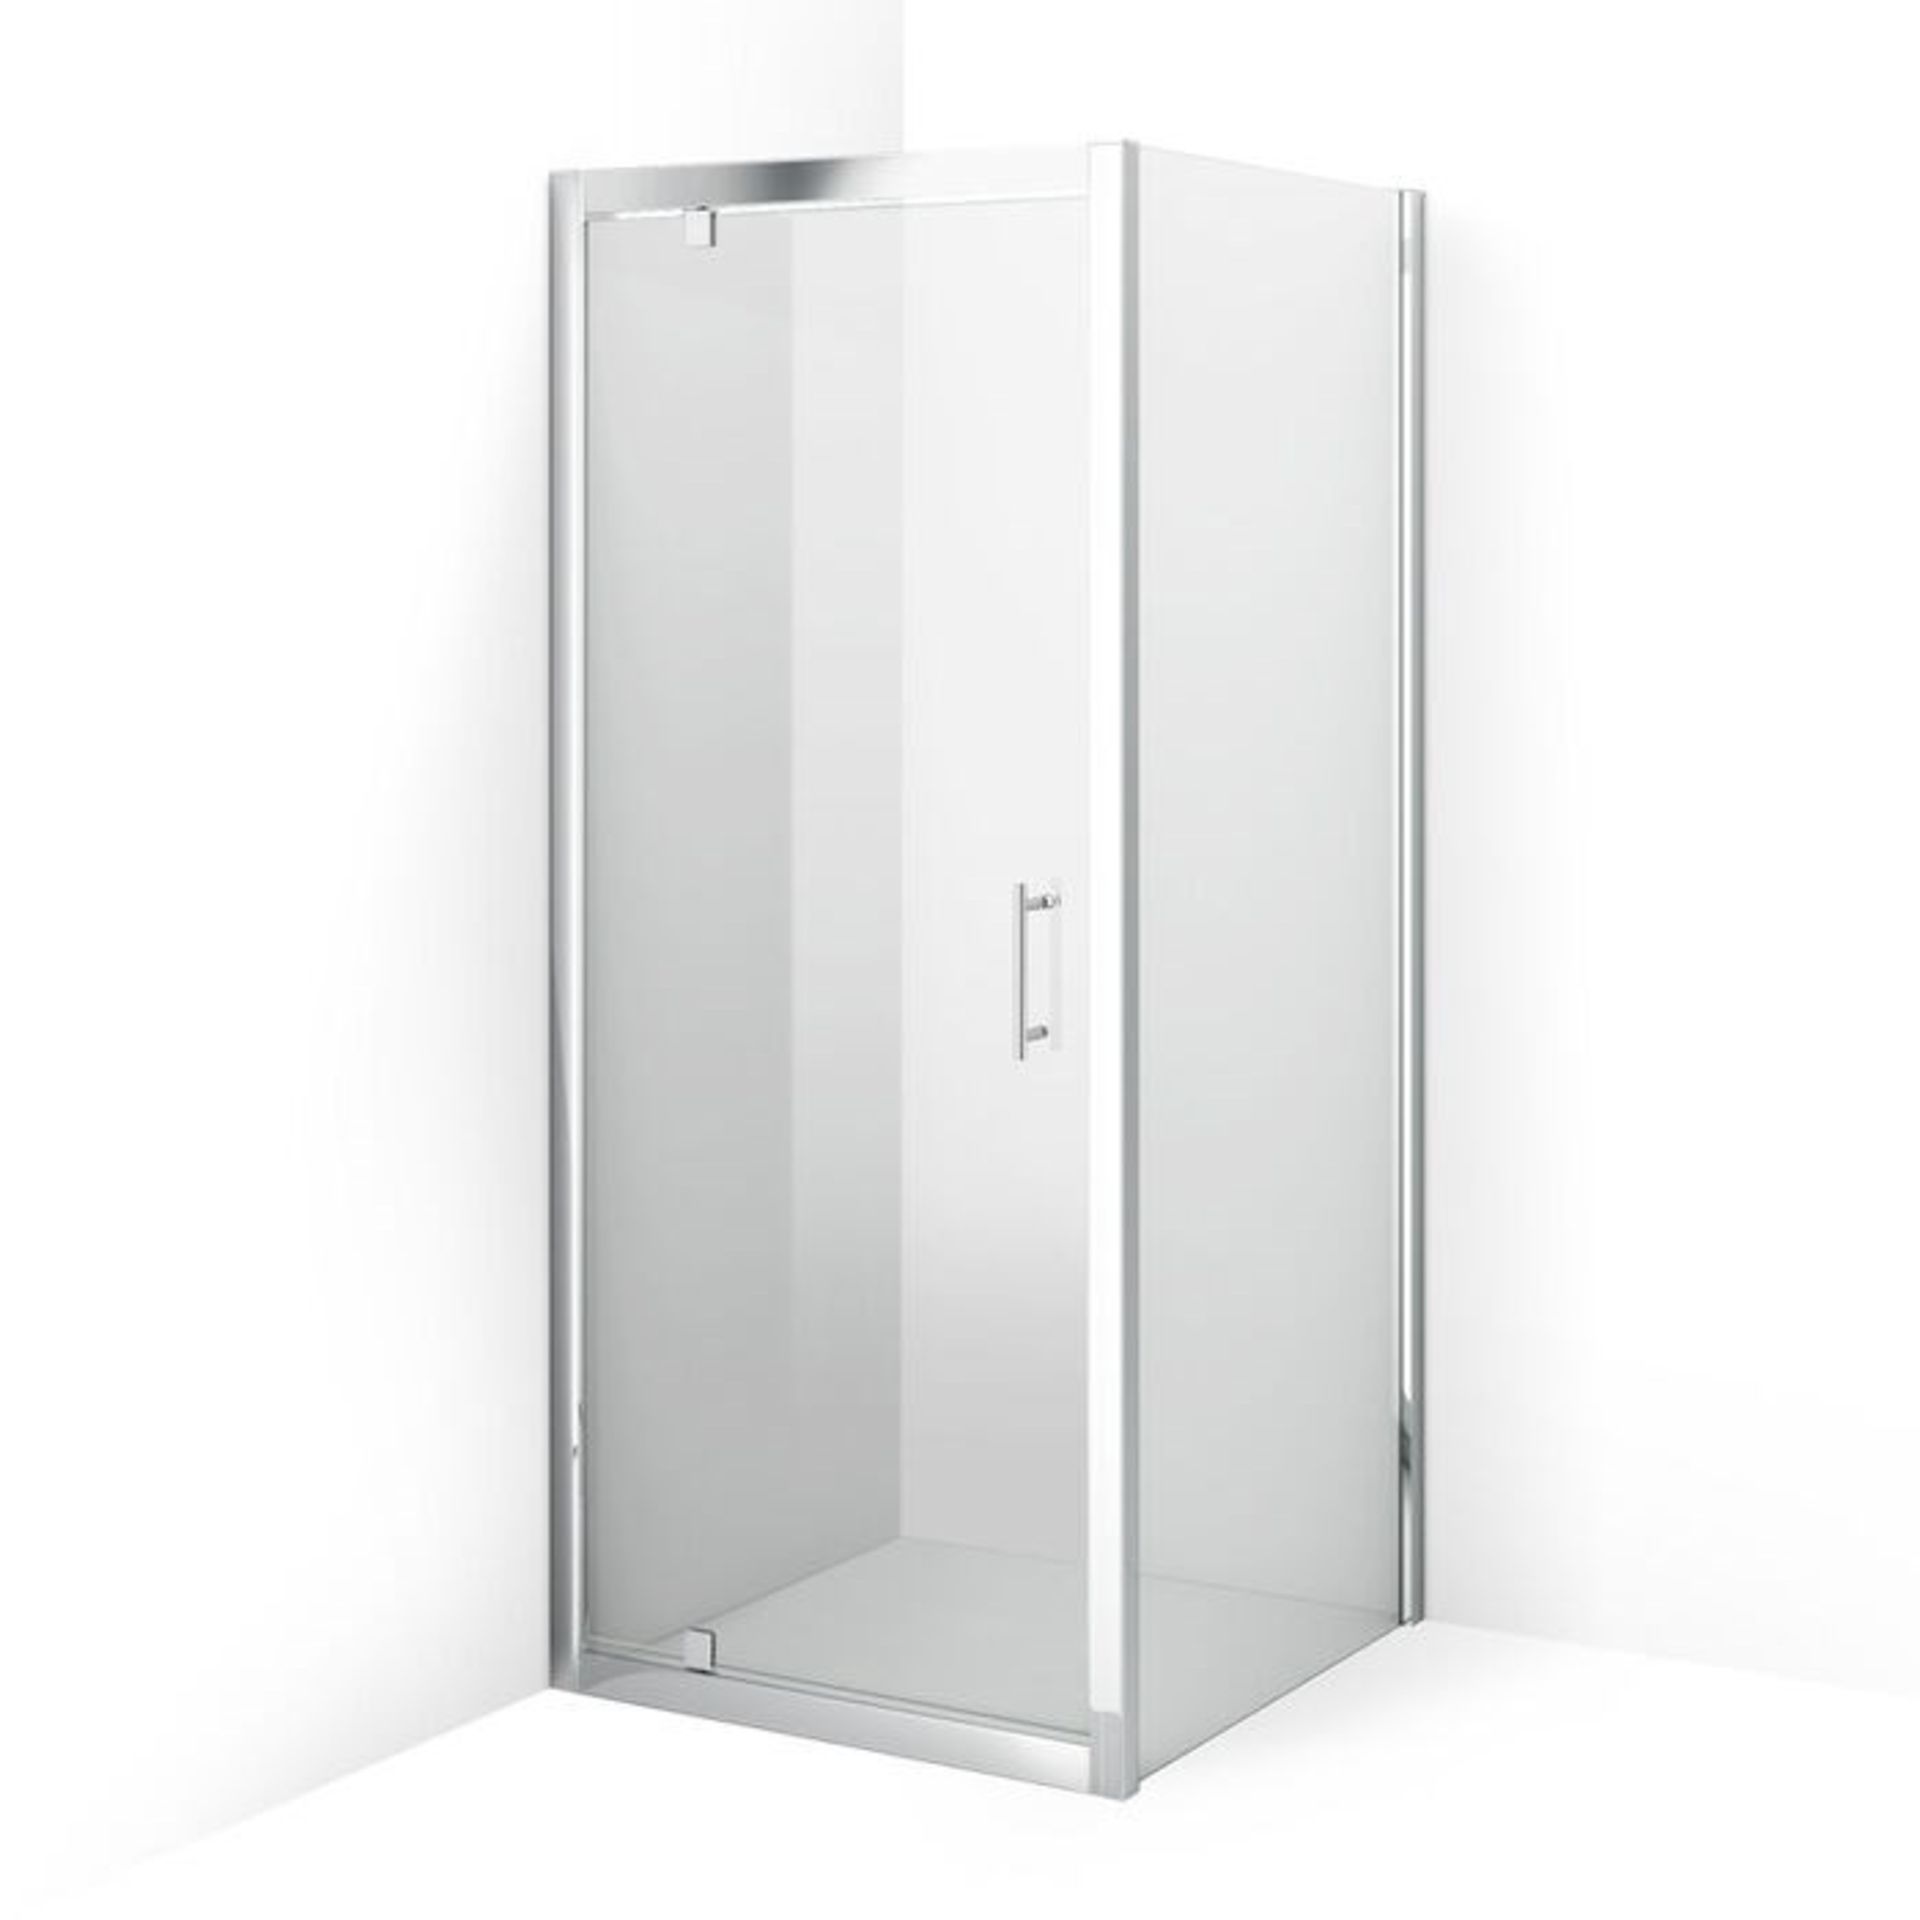 Twyfords 700x700mm - 6mm - Elements Pivot Door Shower Enclosure. RRP £330.99.6mm Safety Glass ... - Image 4 of 4